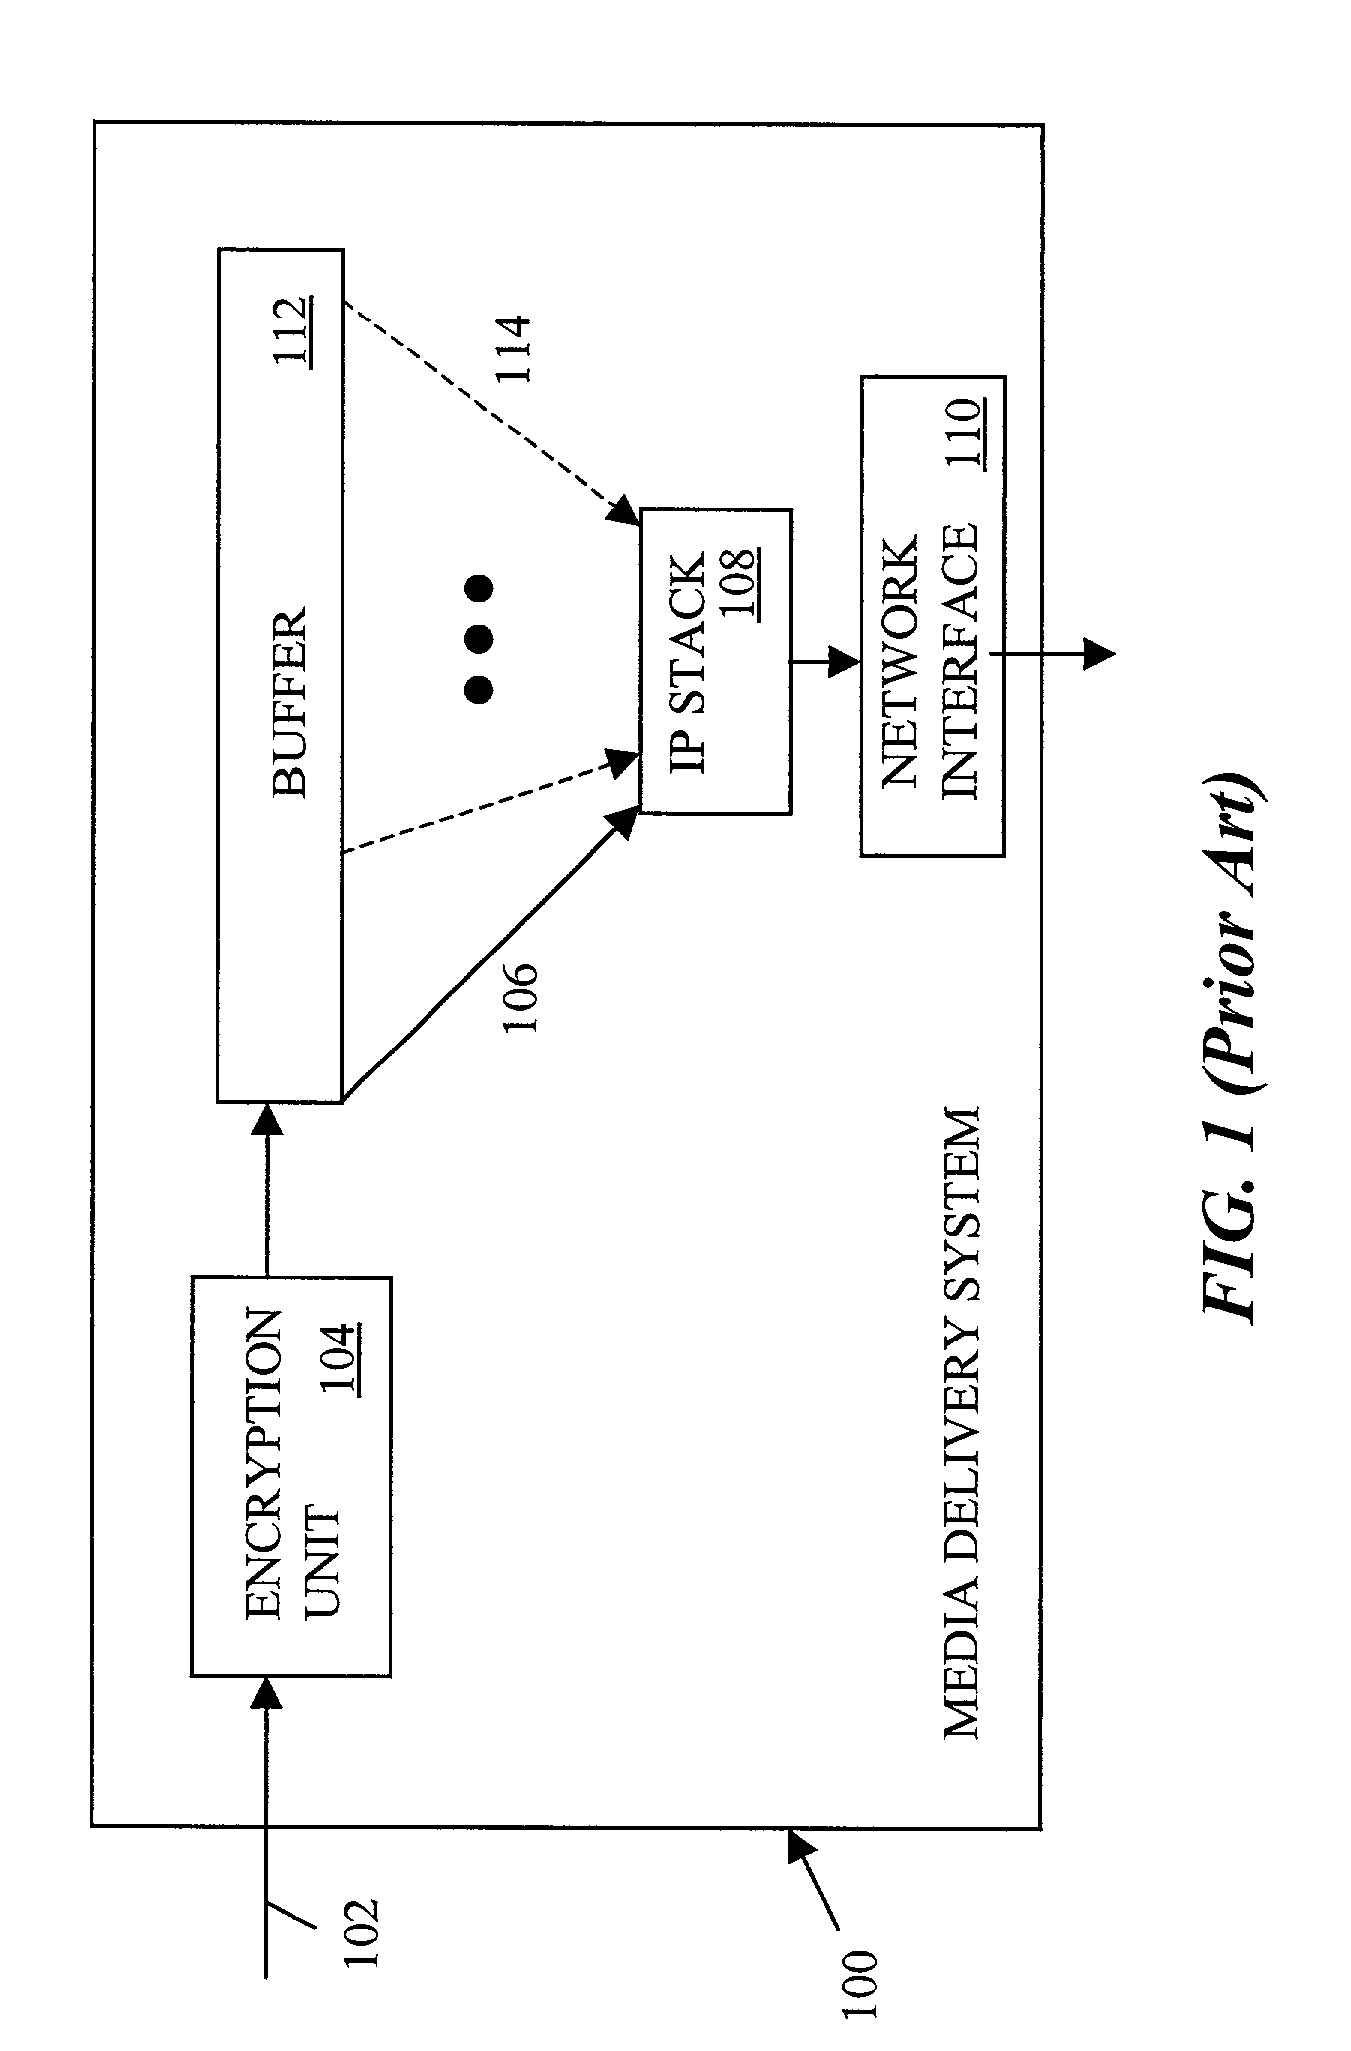 Method and system for providing time-shifted delivery of live media programs